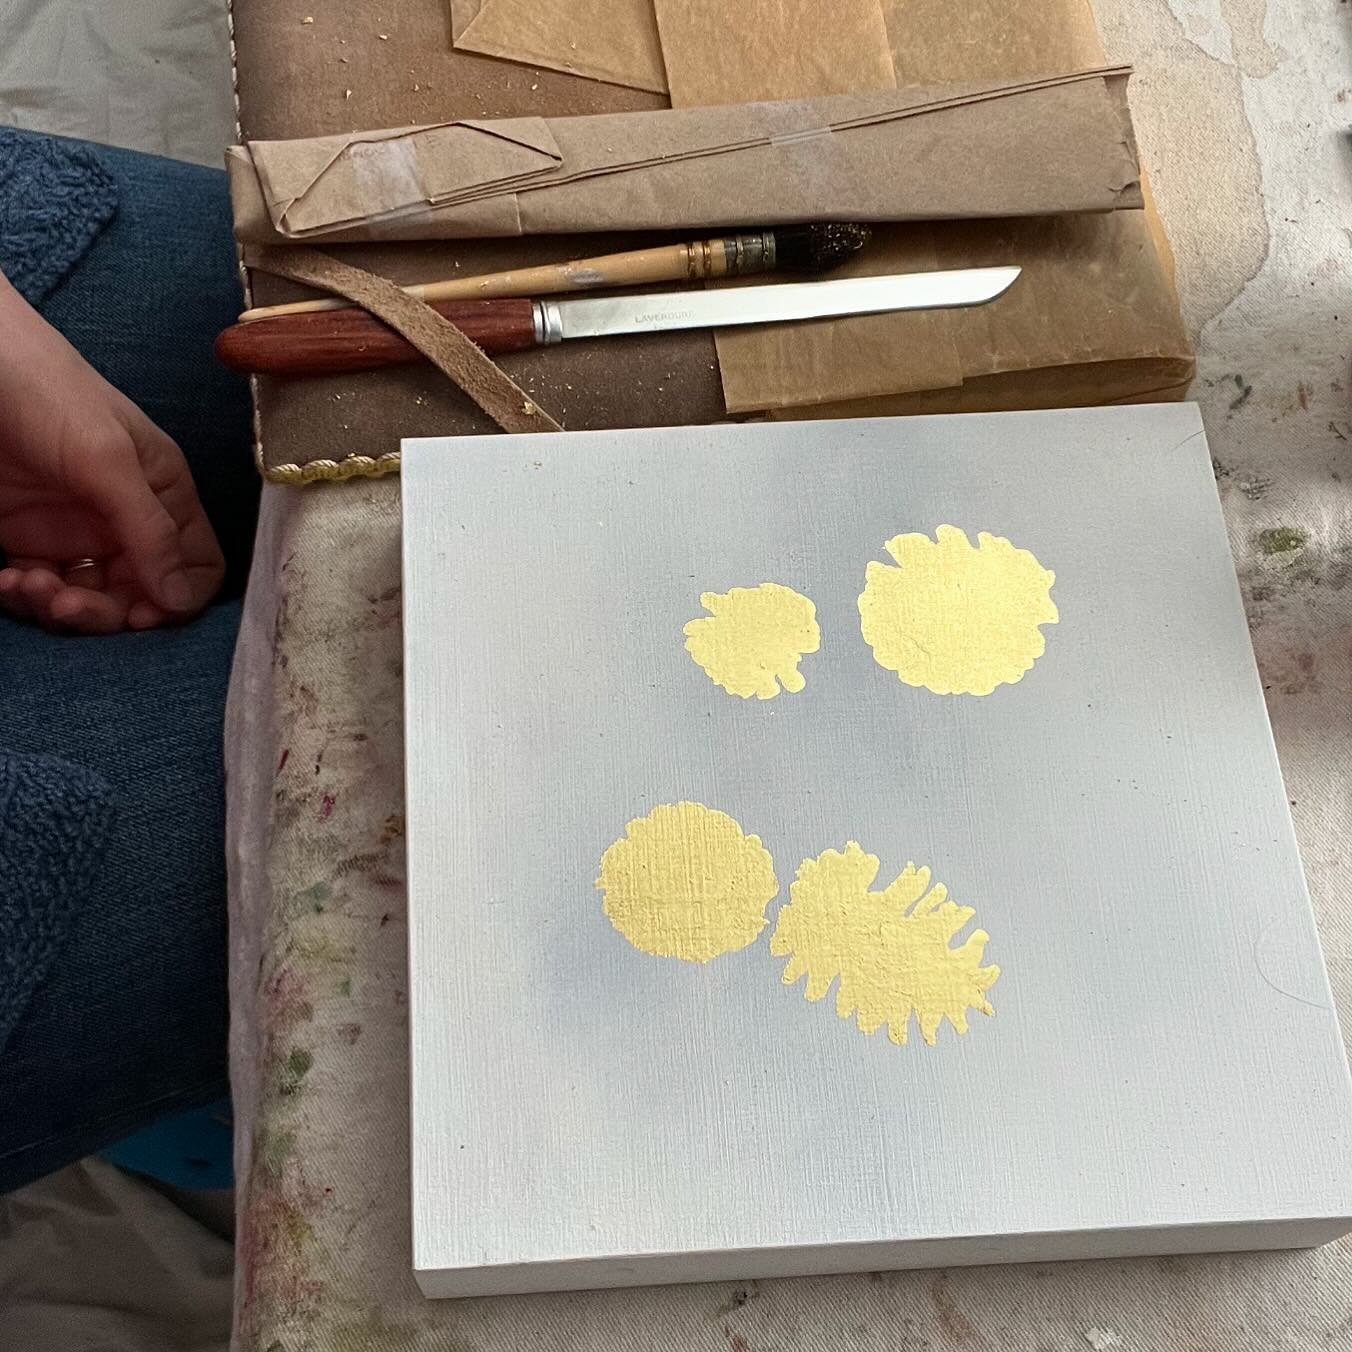 Working with gold and cones for a project coming later this year. It&rsquo;s fun to use my artisan skills with my painting, really why is there a division between artist and artisan? It&rsquo;s fictional.
#naturepatterns
#gilding
#treecones
#conifers